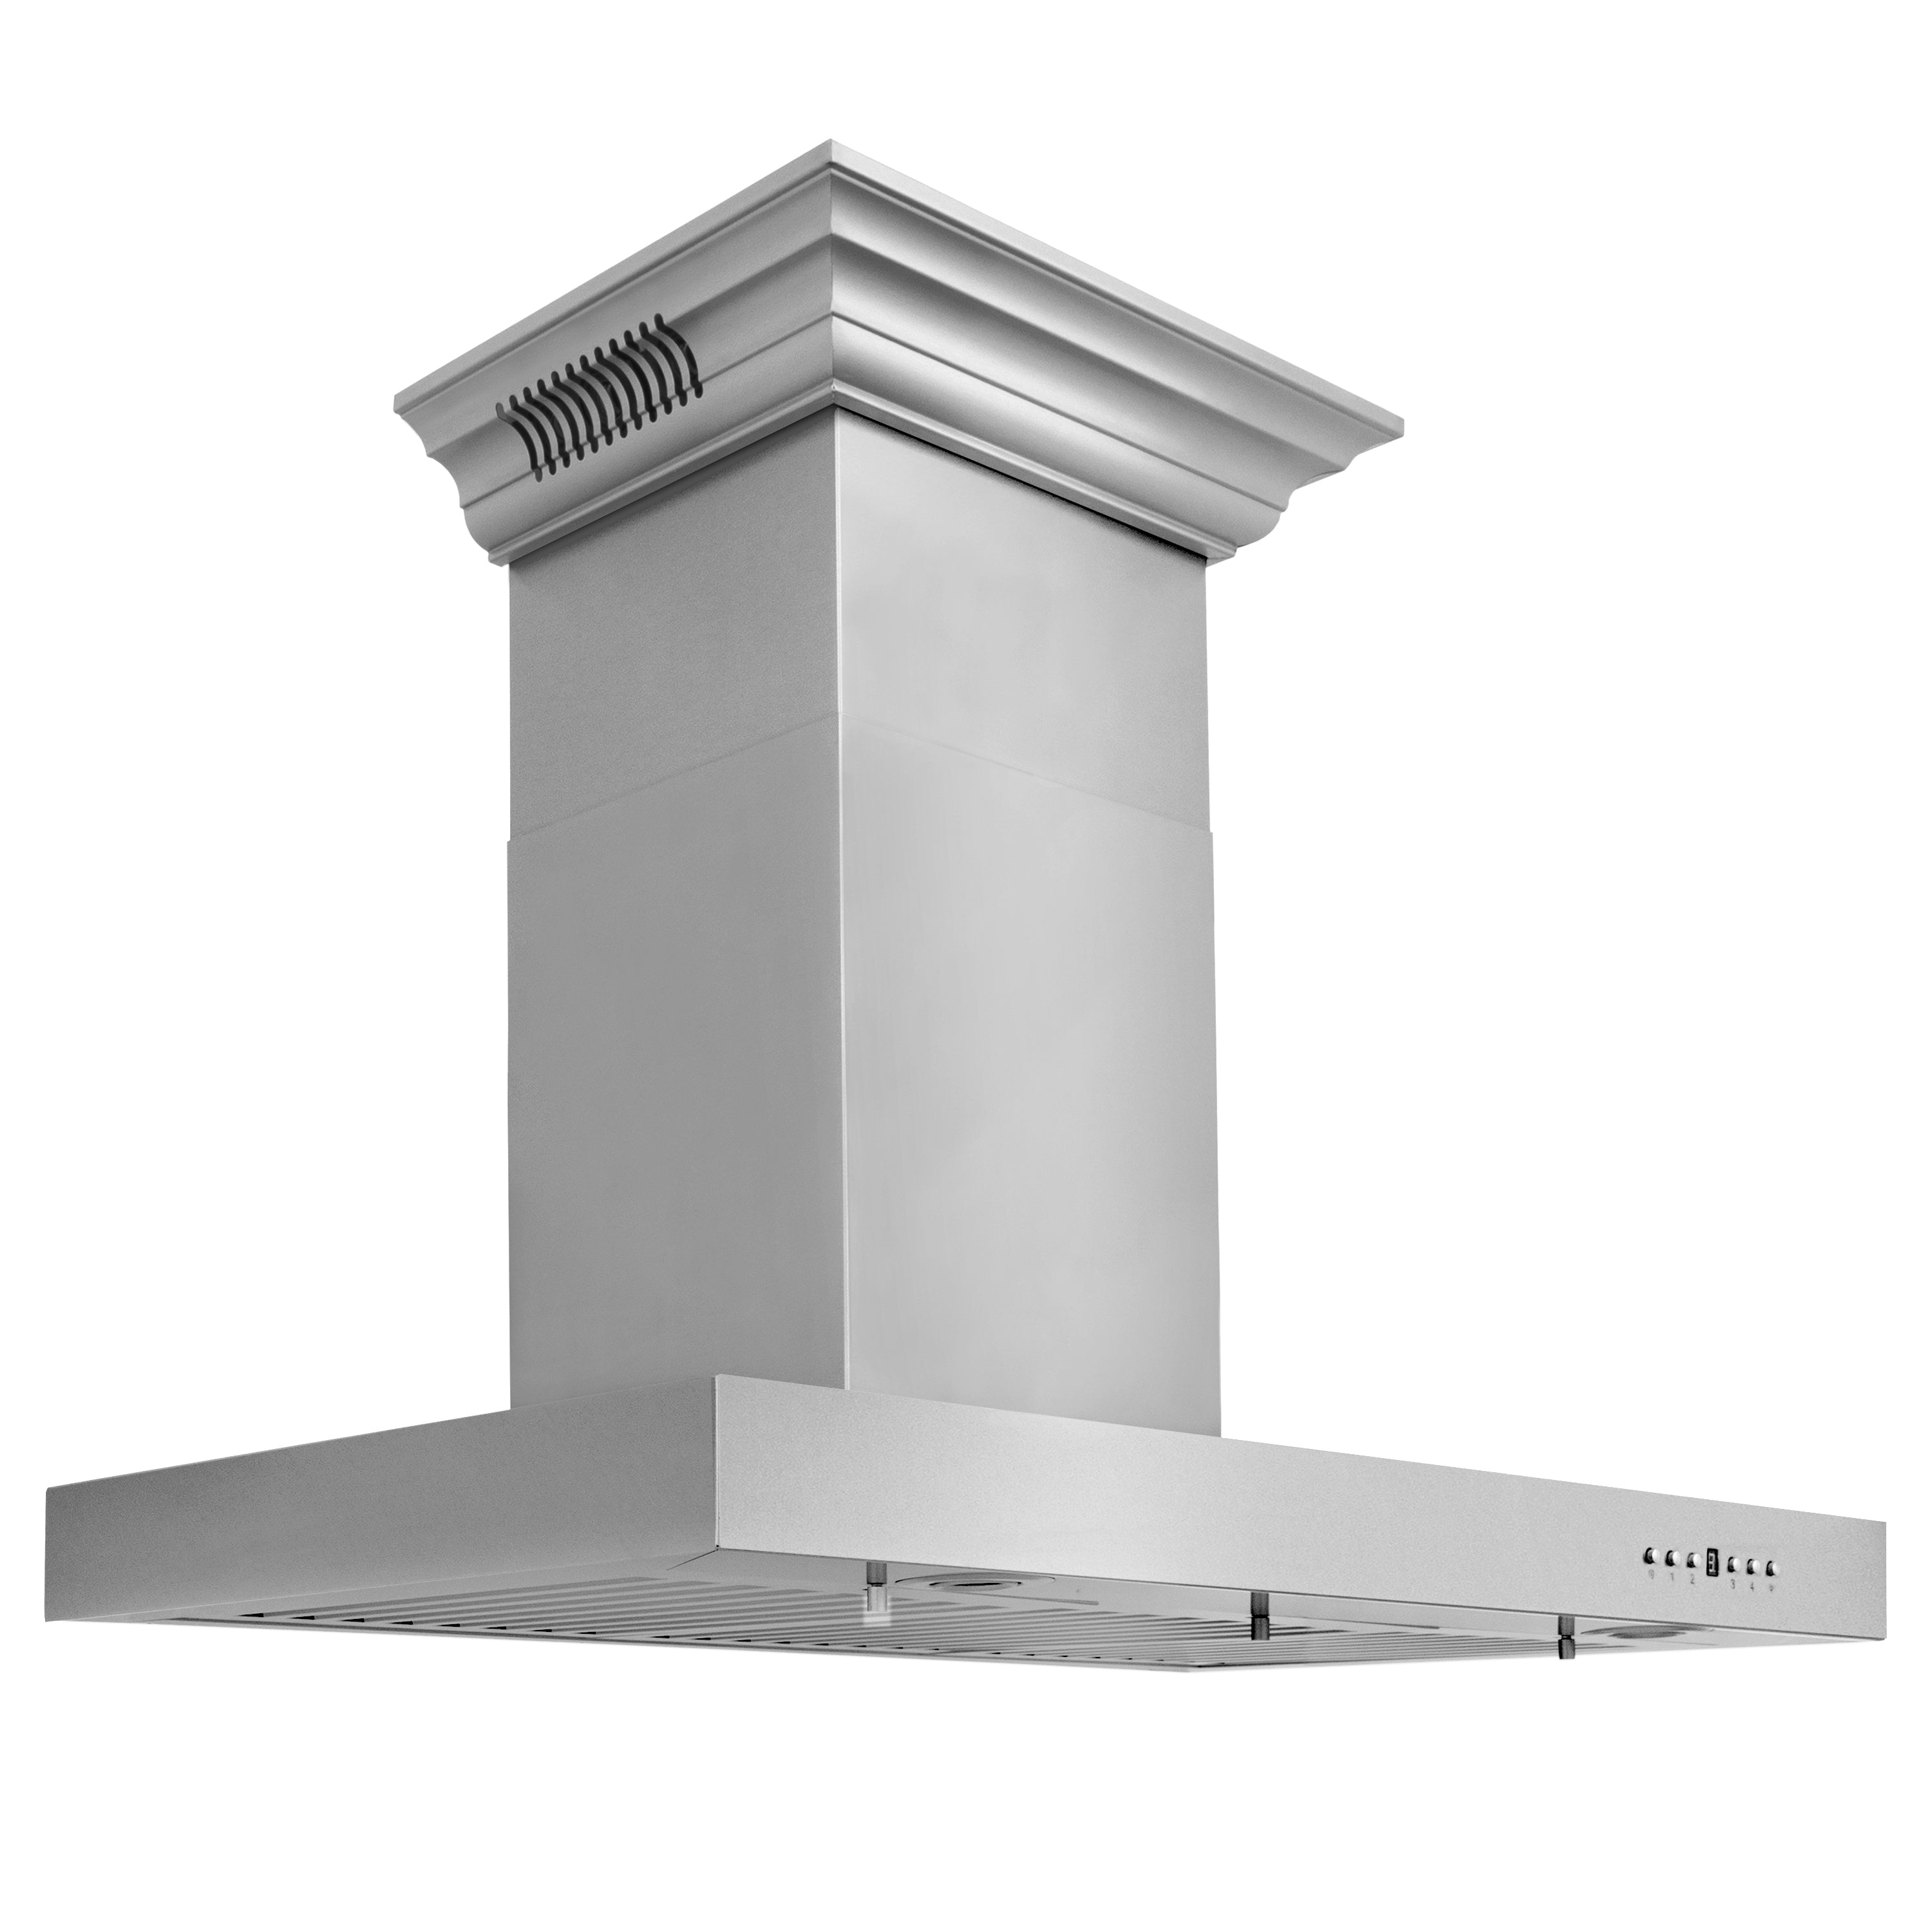 36" ZLINE CrownSound√∞ Ducted Vent Wall Mount Range Hood in Stainless Steel with Built-in Bluetooth Speakers (KECRN-BT-36)